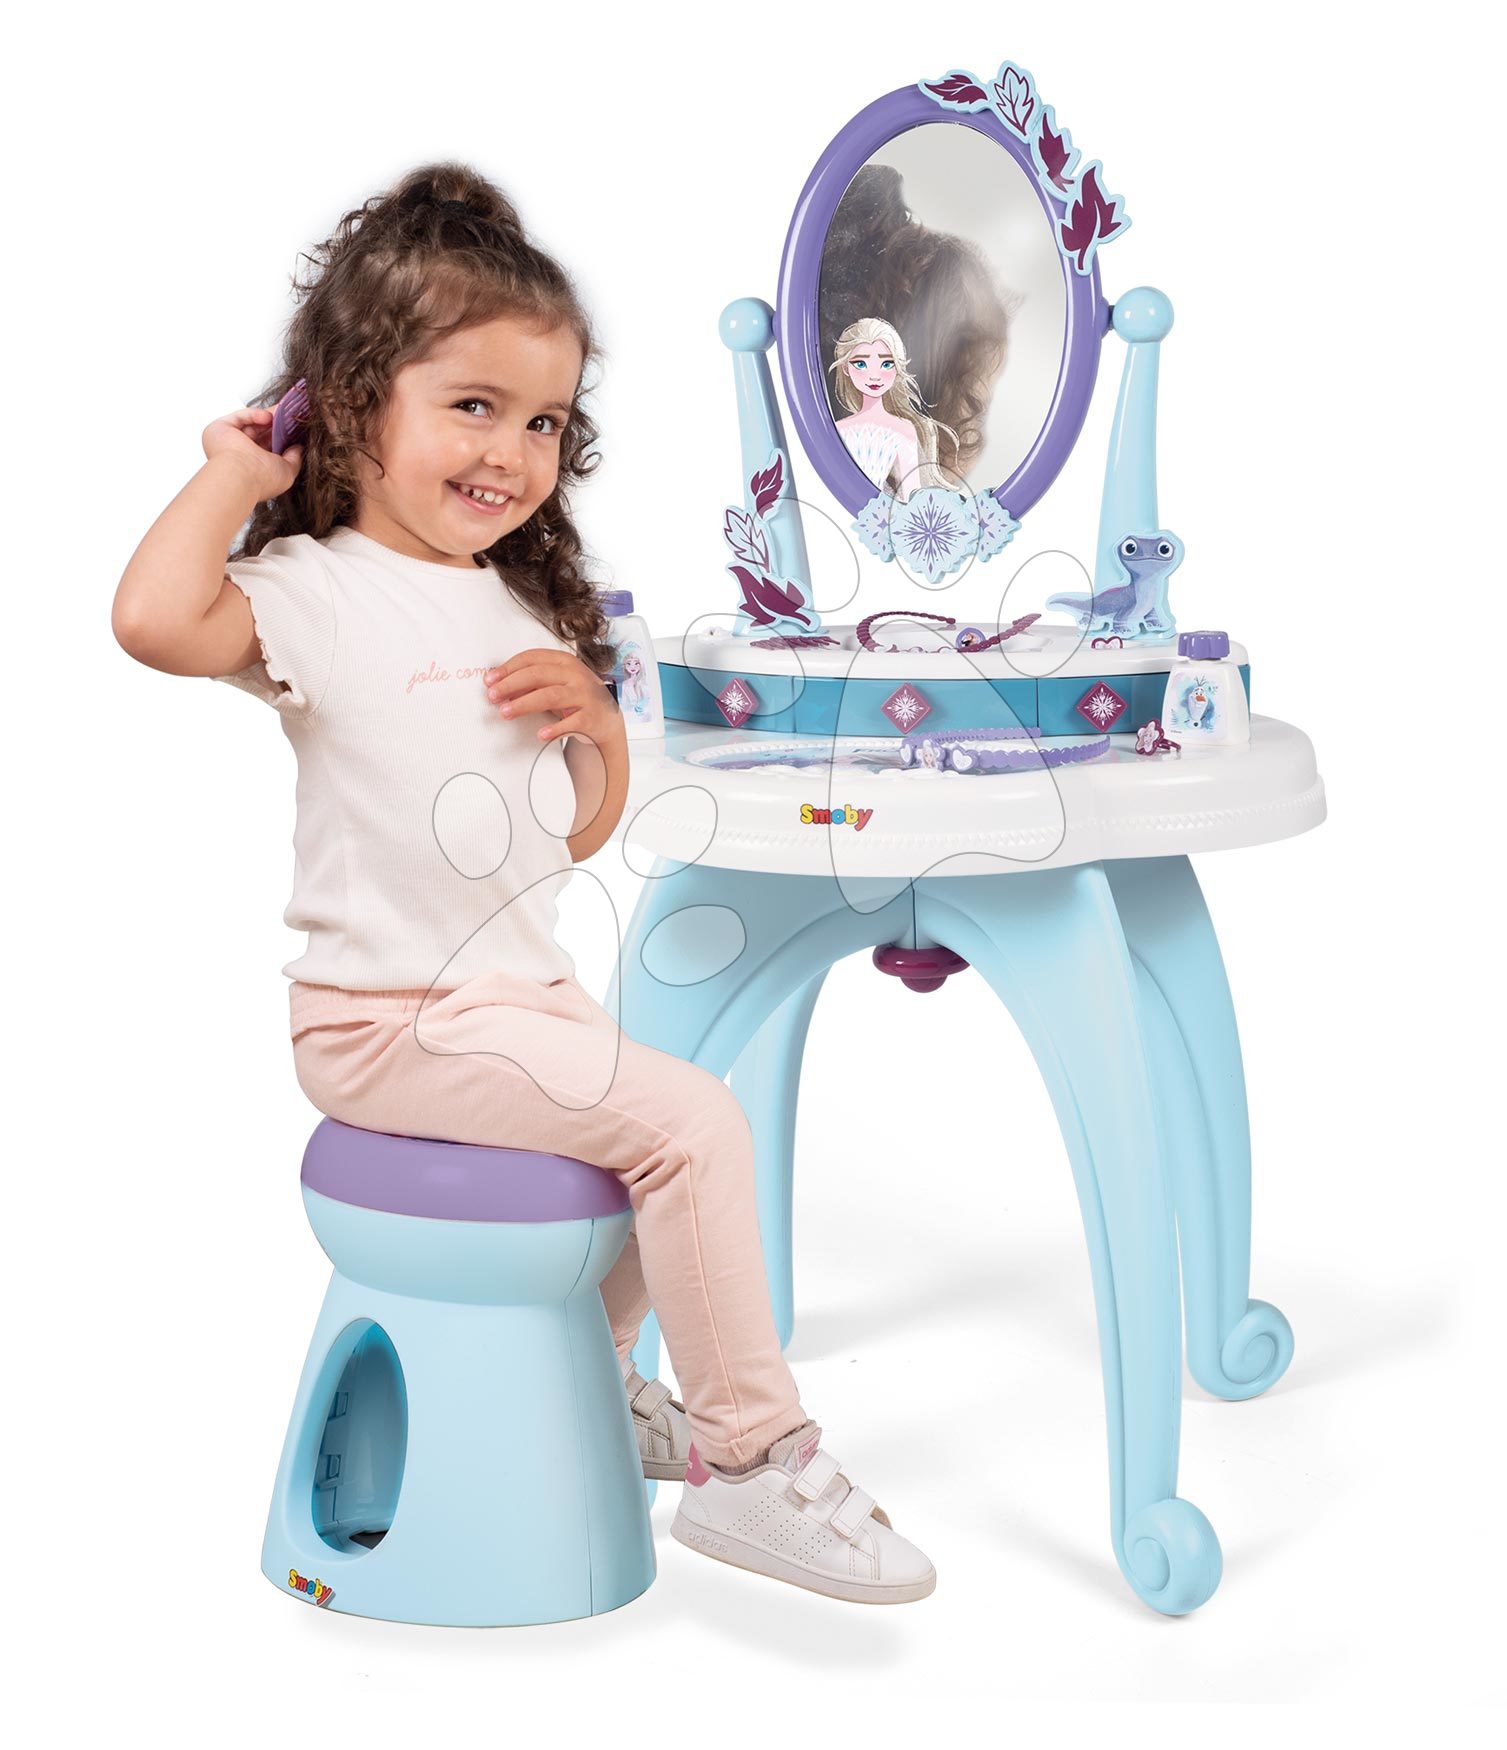 Smoby - Hello Kitty 2-in-1 Dressing Table